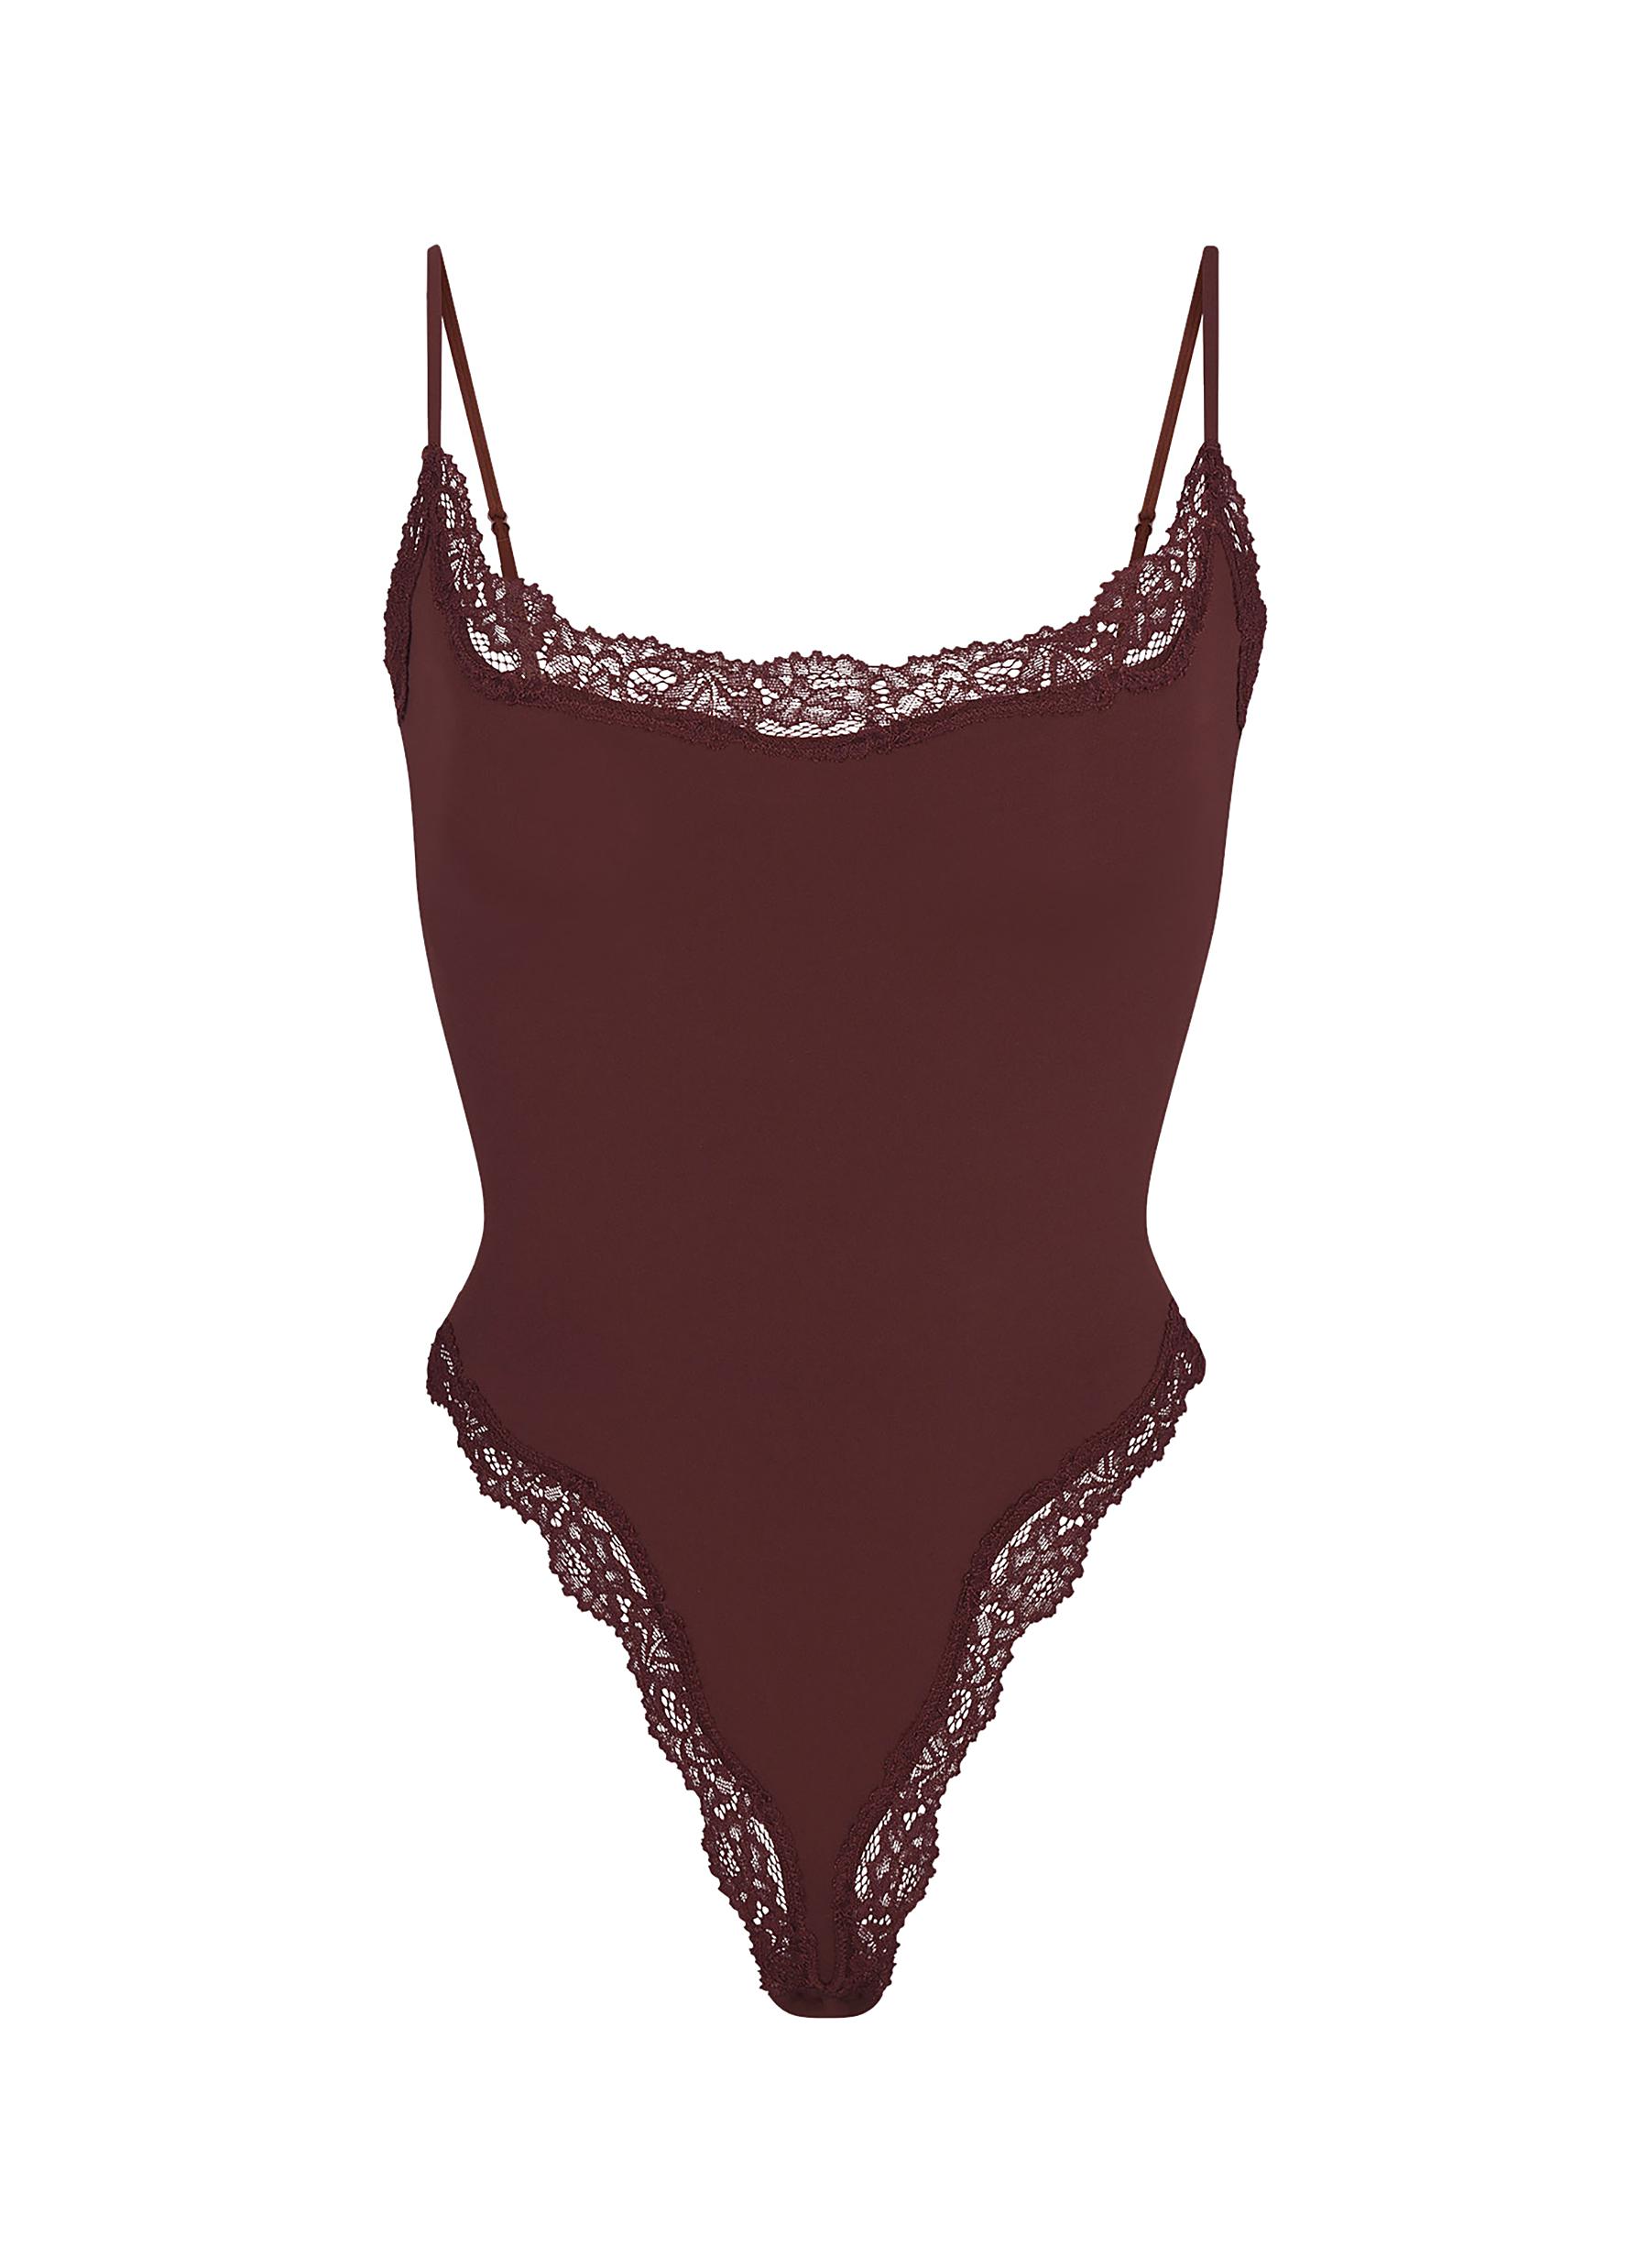 It doesn't get sweeter than the Lace Pointelle Cami Bodysuit in